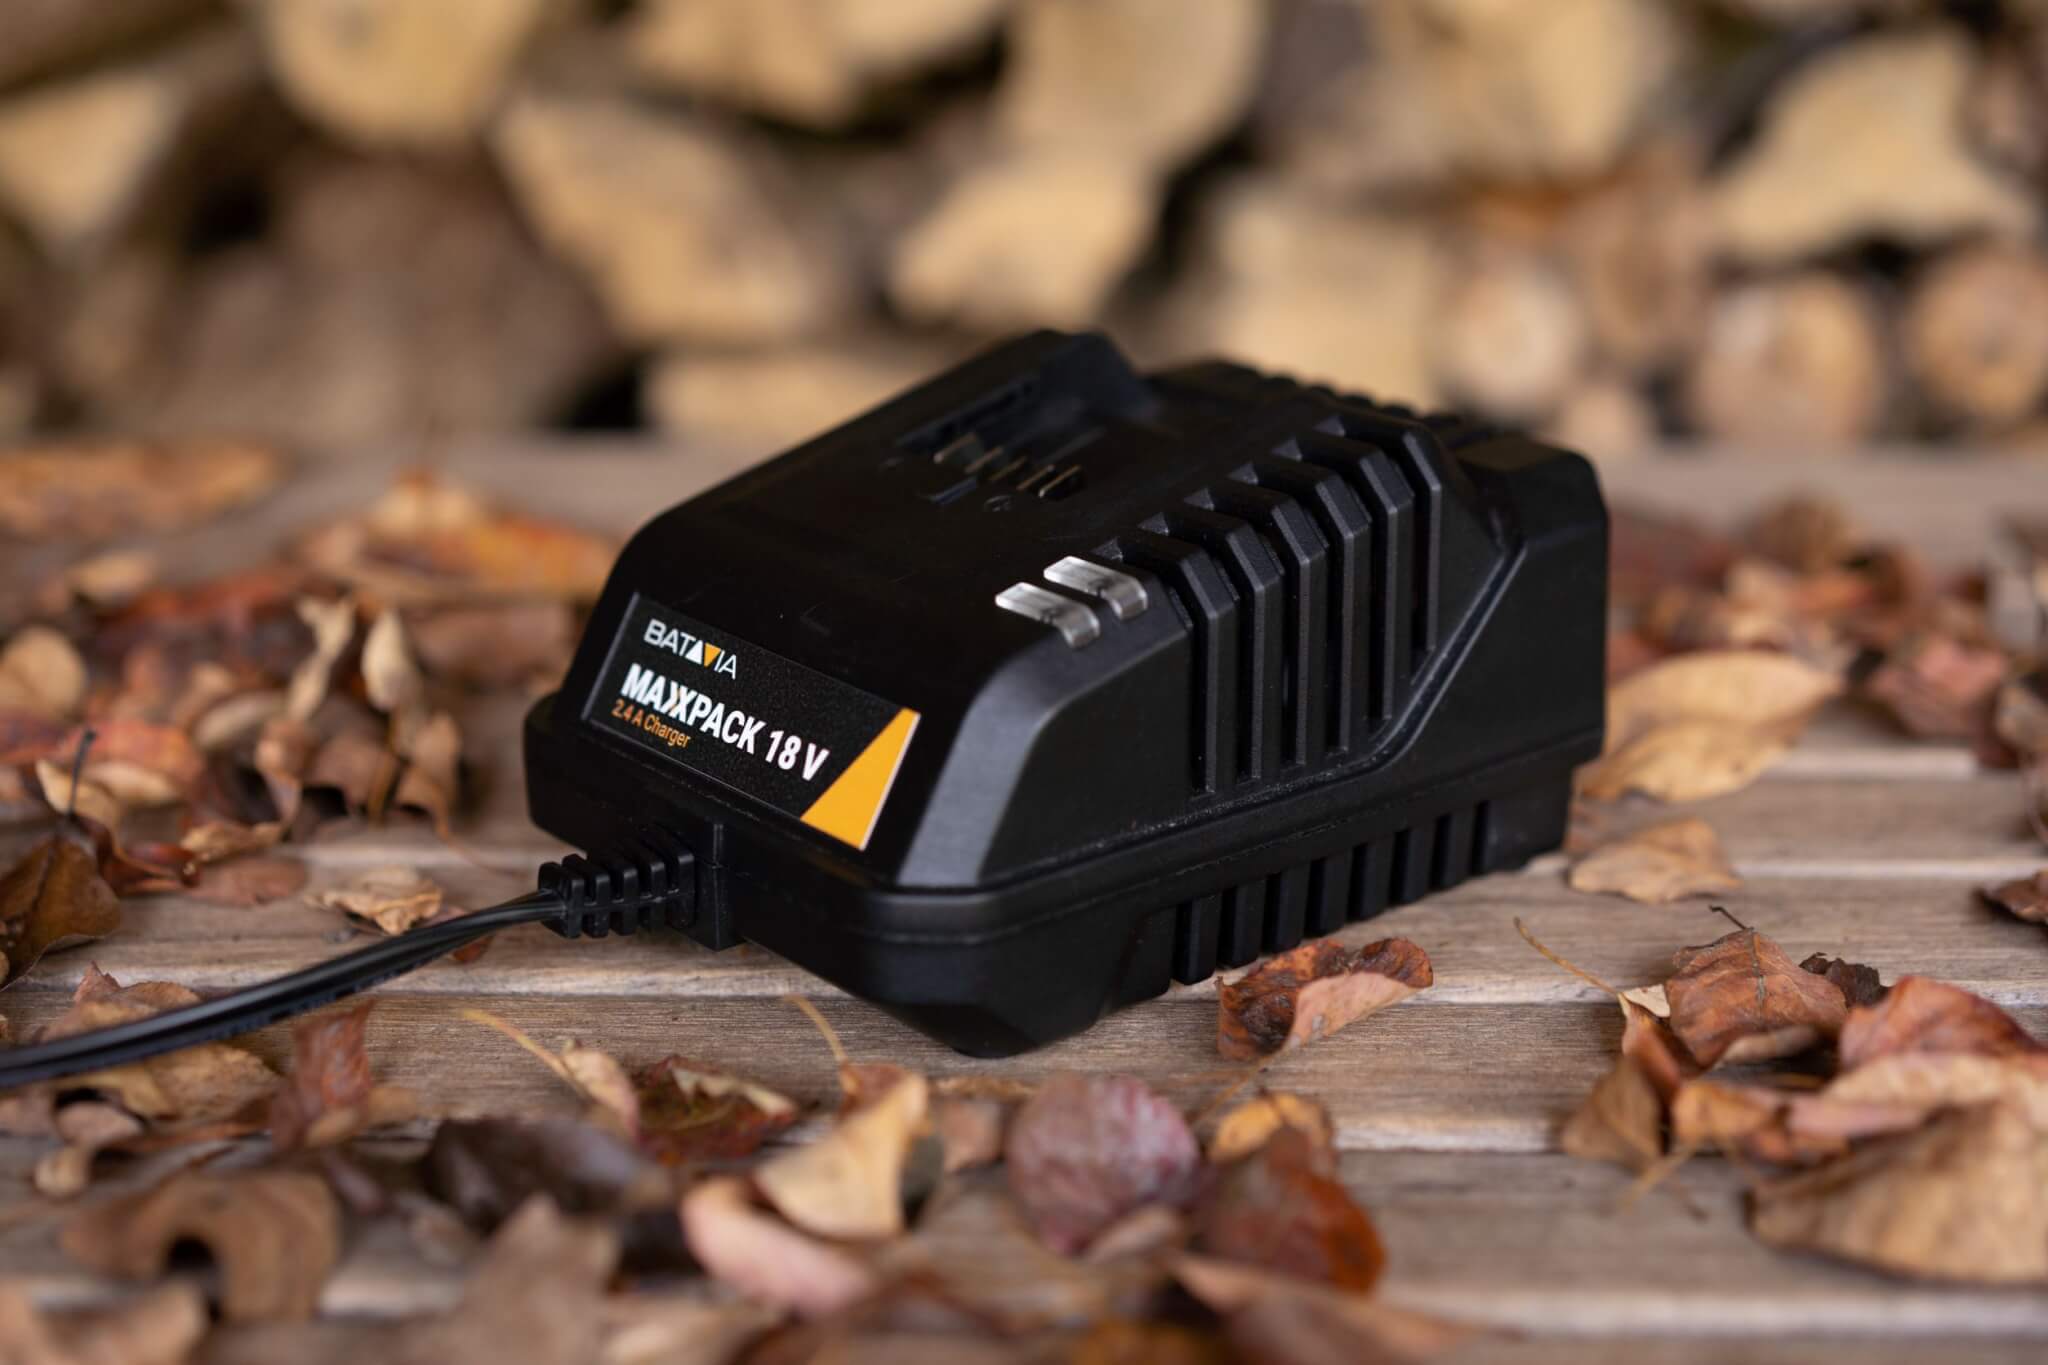 Universal power tool 18V battery charger | Maxxpack collection | Batavia